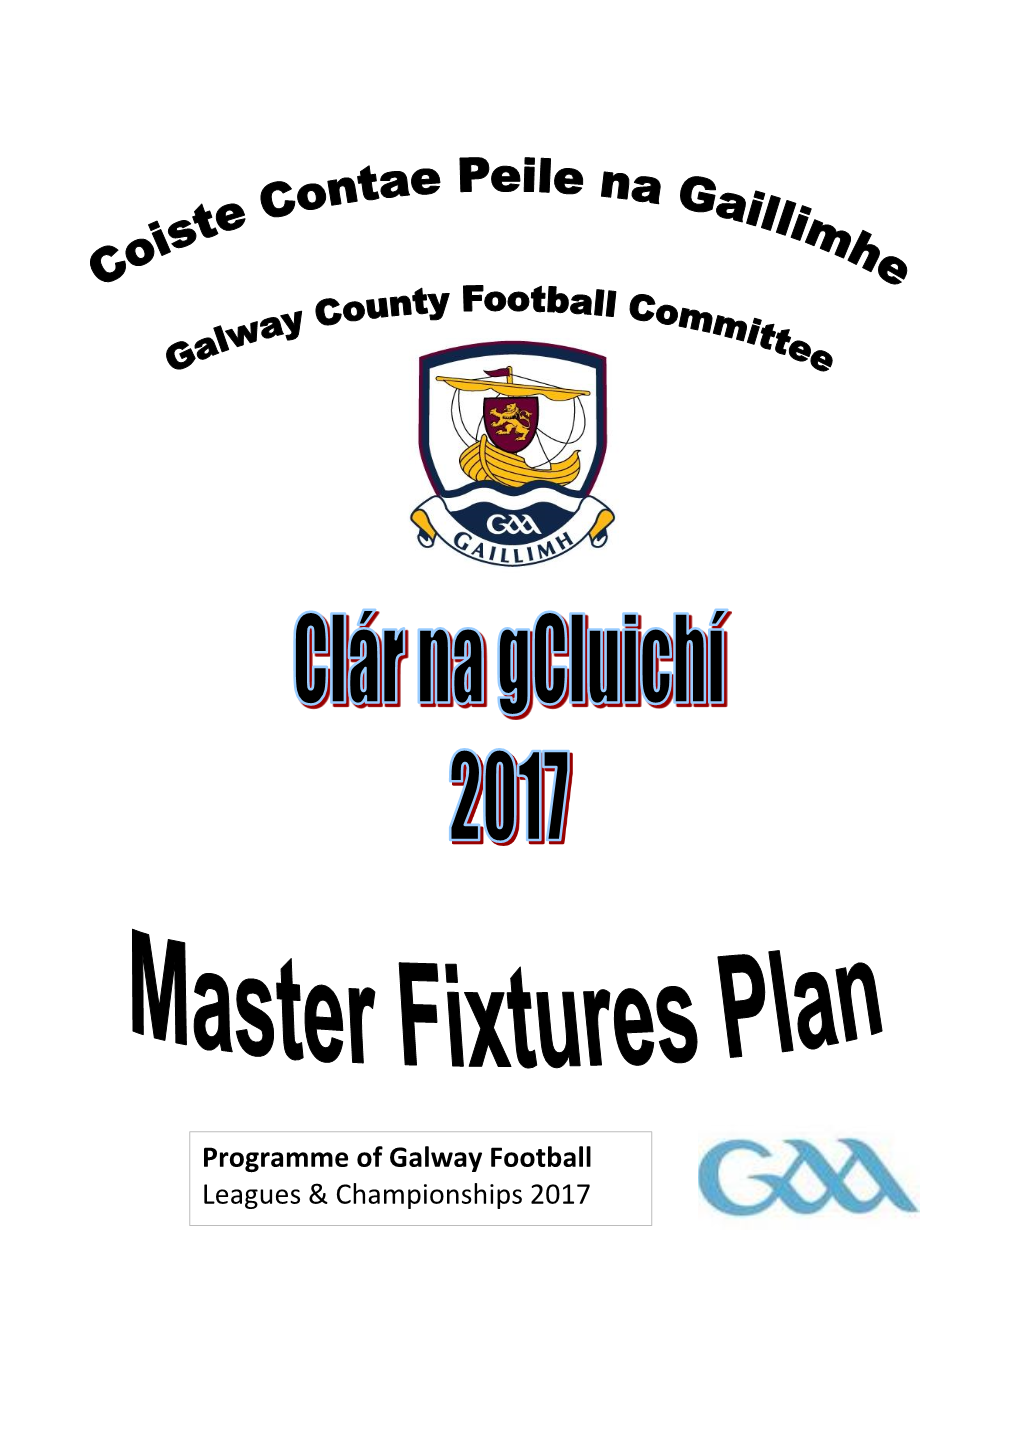 Programme of Galway Football Leagues & Championships 2017